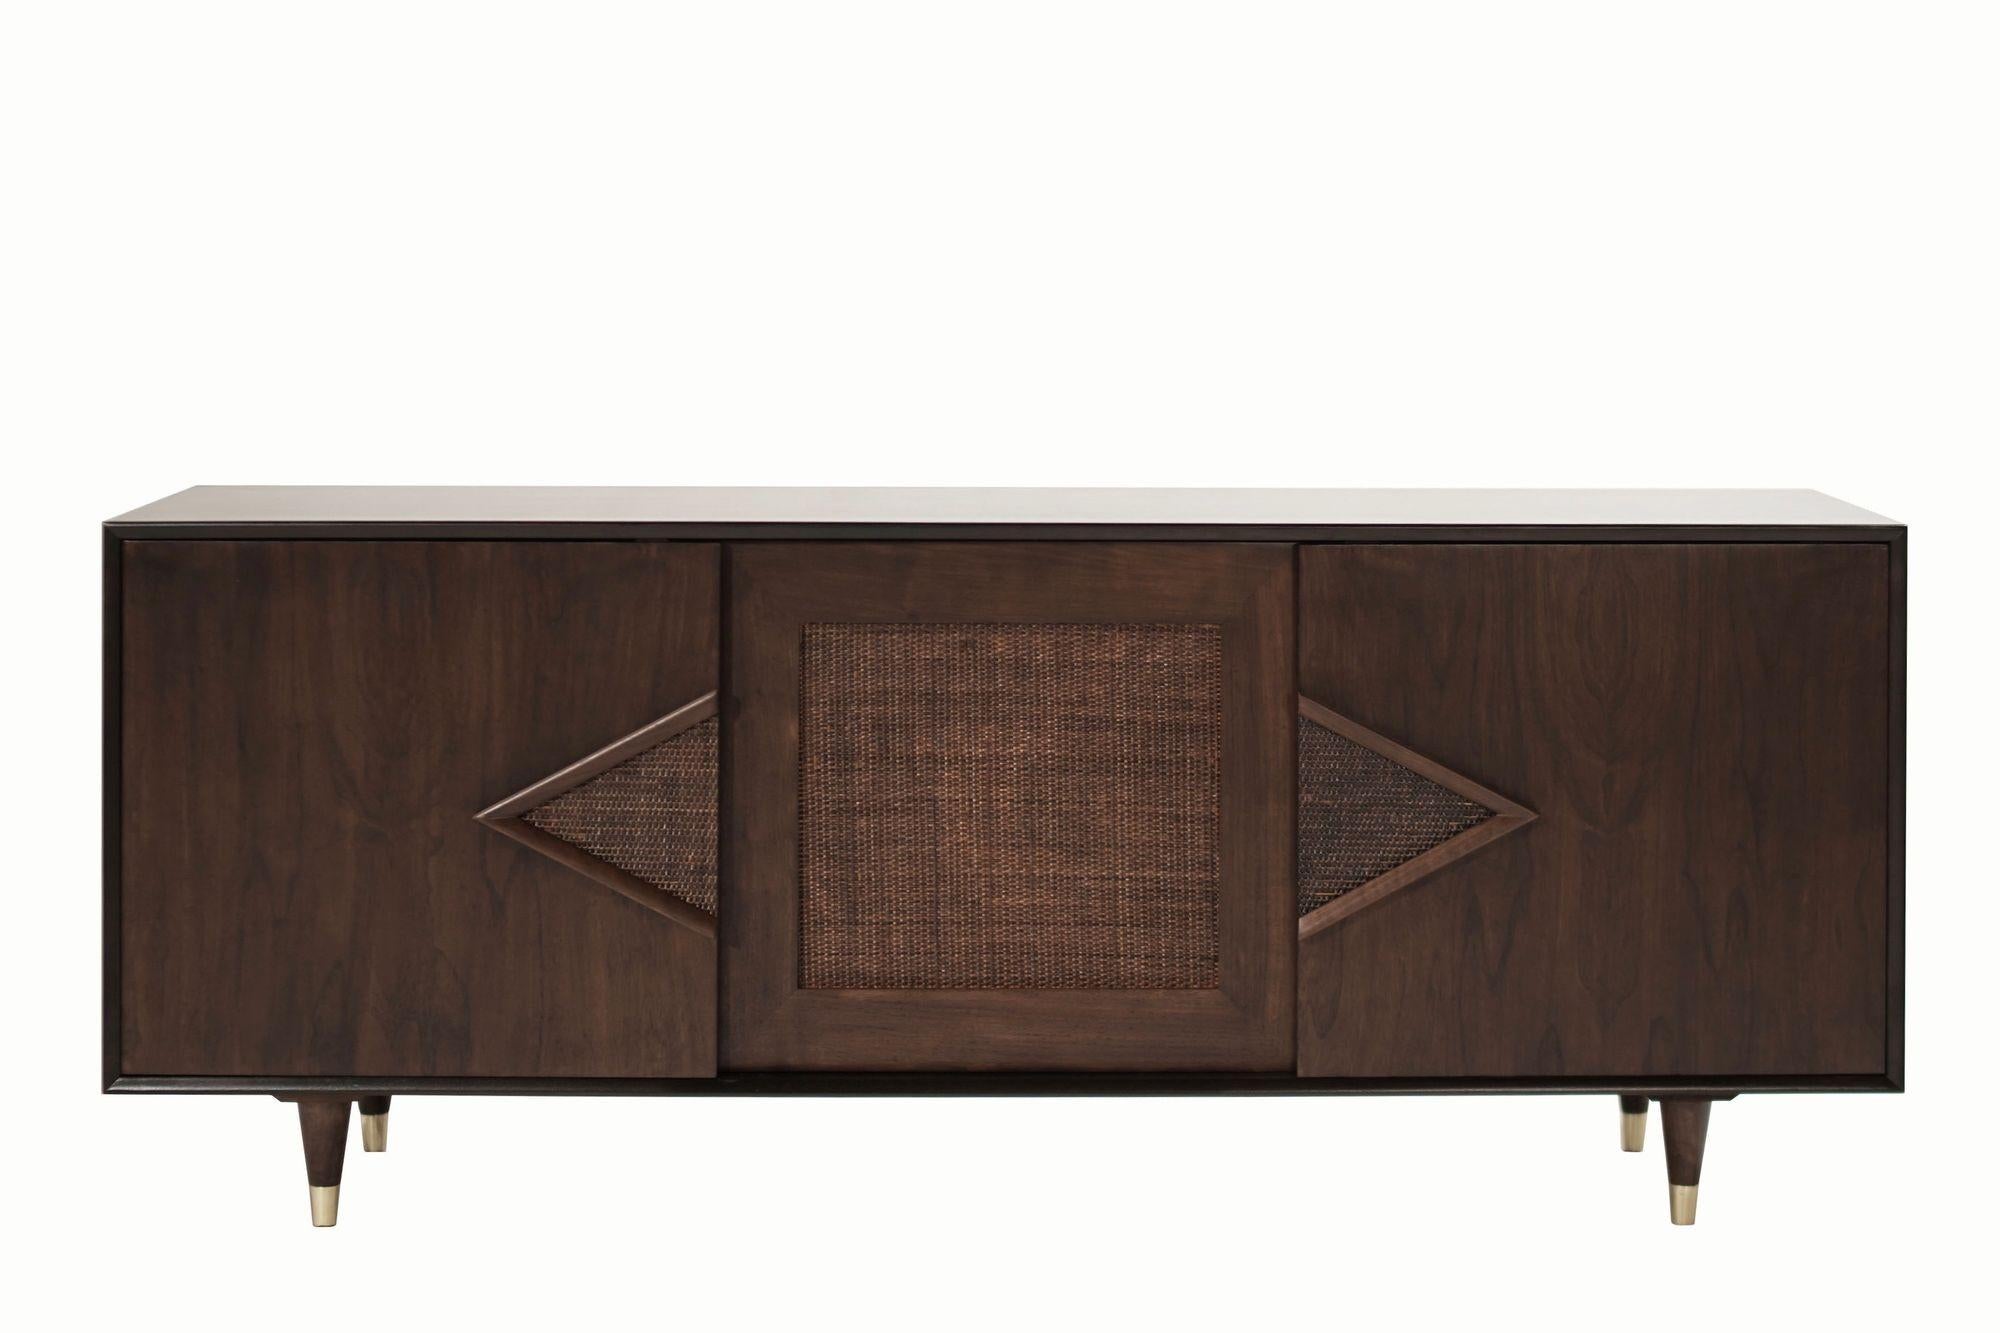 A very handsome credenza or sideboard executed in dark walnut, completely restored, circa 1950-1950. It features three sliding doors with cane details and brass sabots, each door opens up to reveal shelving, there's also a silverware drawer in the